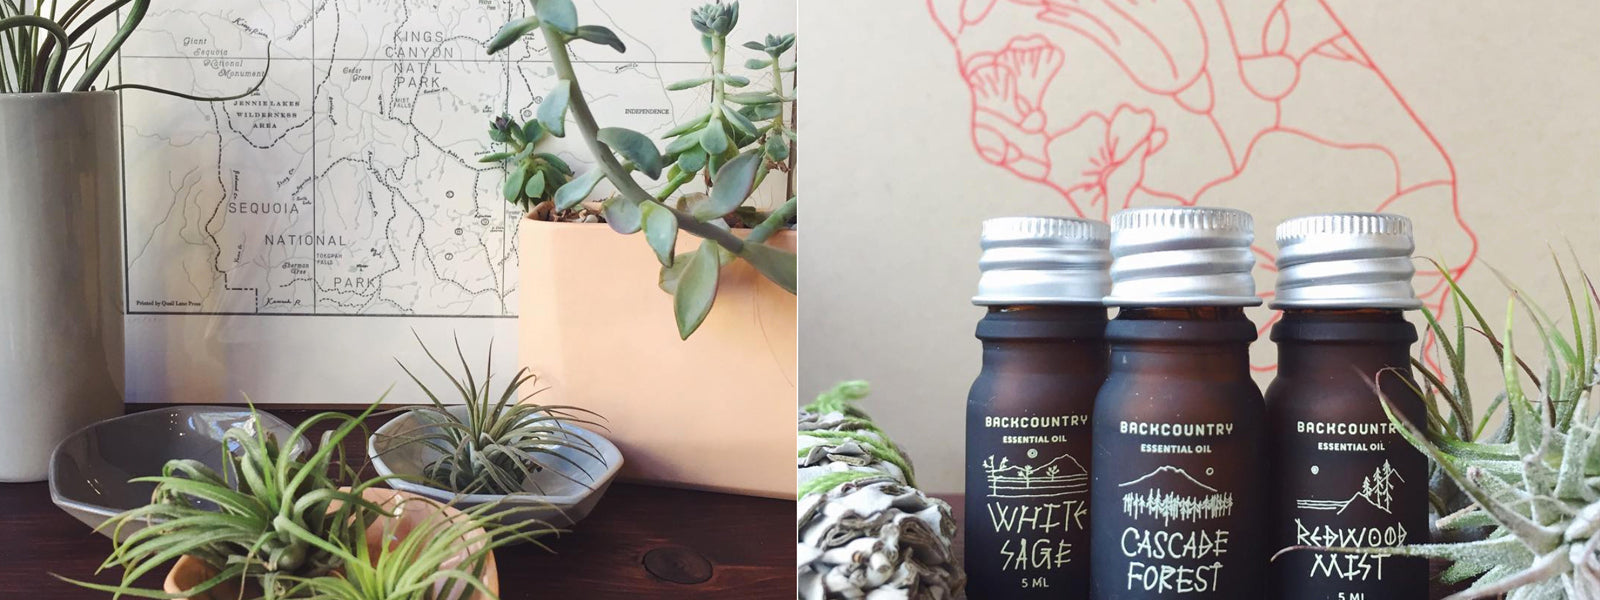 products on a shelf- letterpress map, plants and a vase